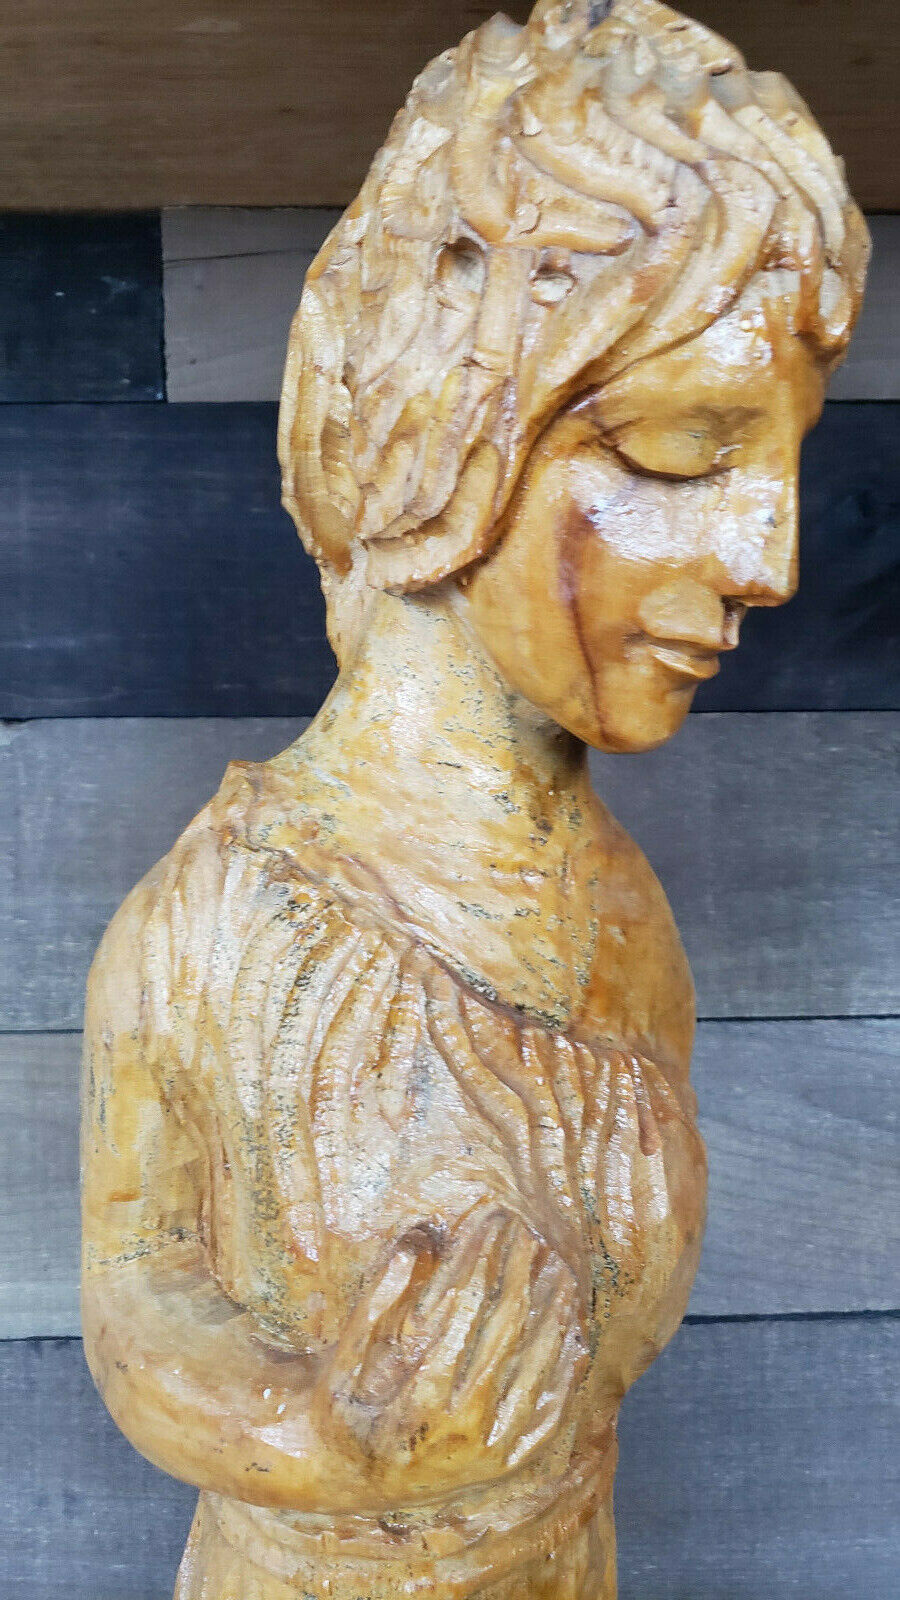 Rare Vintage Handcarved Wooden Statue of a Woman Holding Her Breast. 34" Без бренда - фотография #7